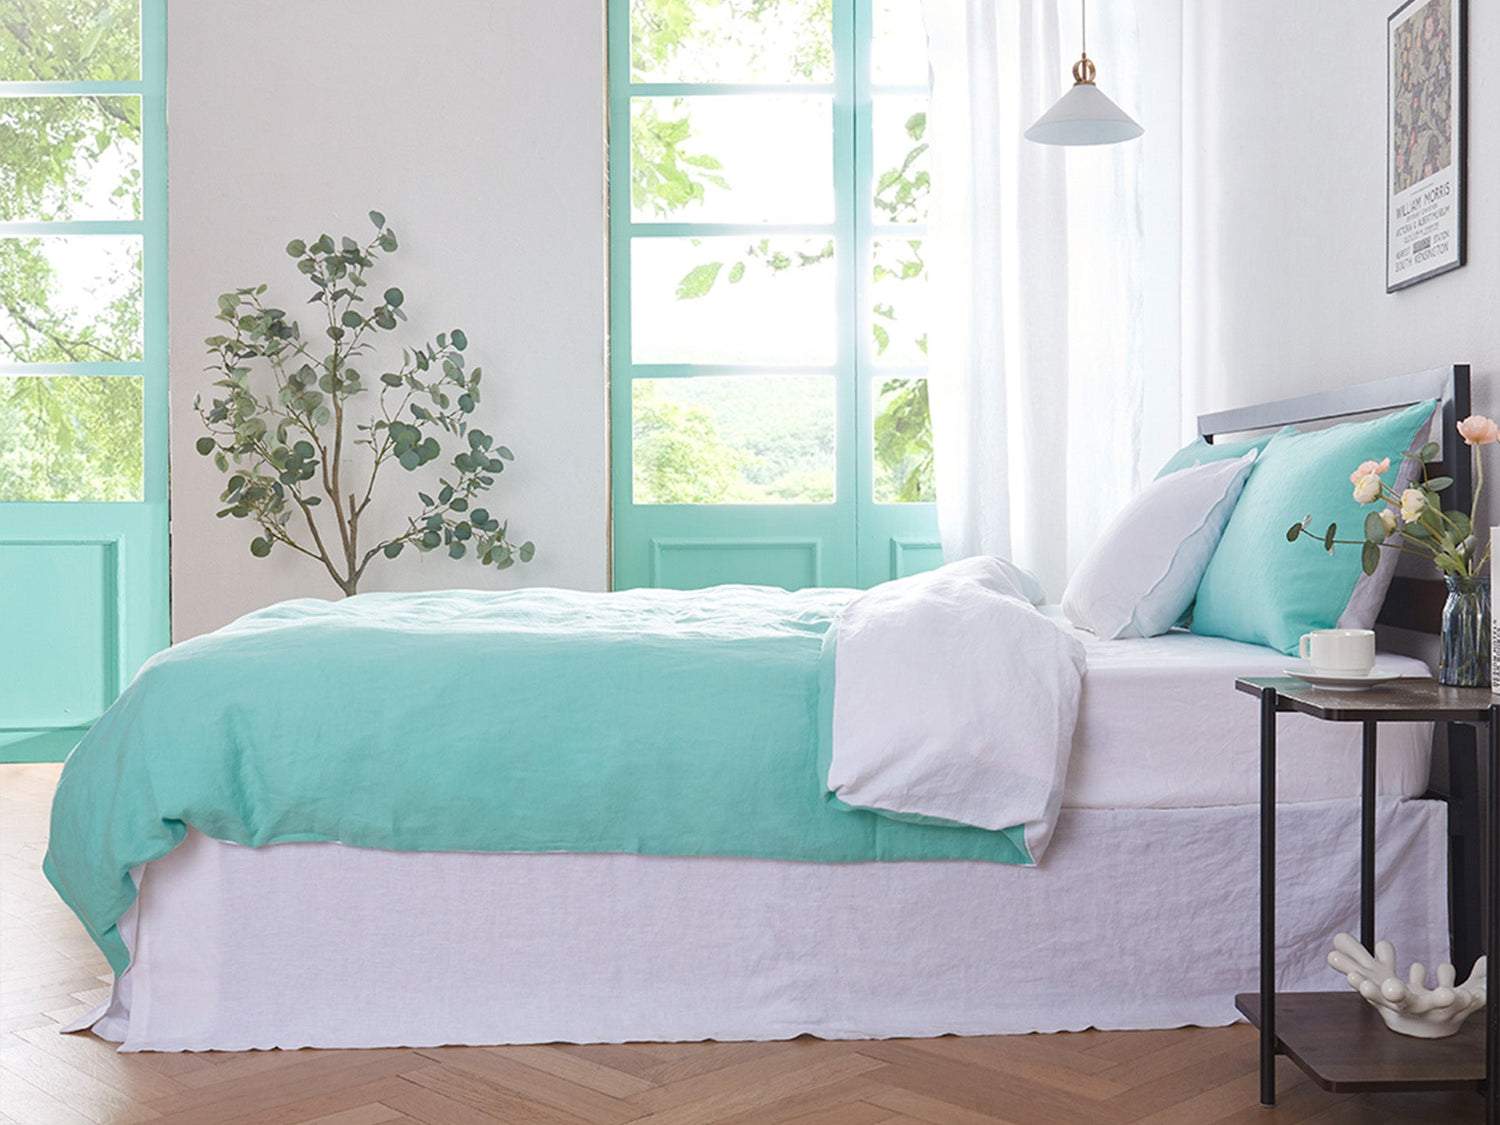 Two-toned aqua and white linen duvet cover on bed